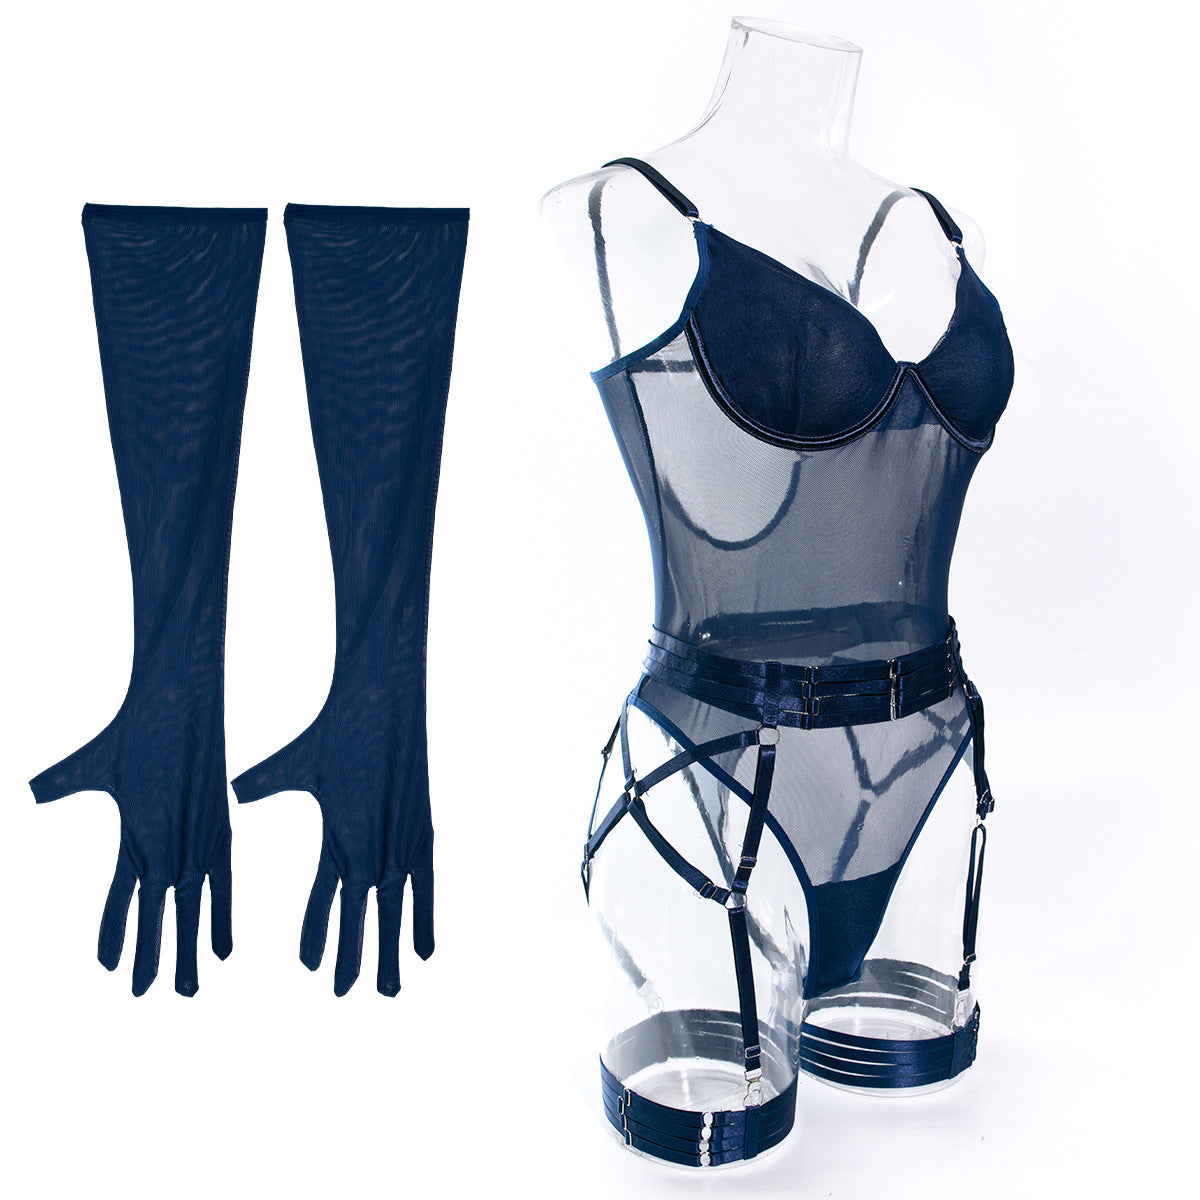 Delicate Mesh Elegance Teddy Set with Gloves and Lustrous Suspender Accents mooods